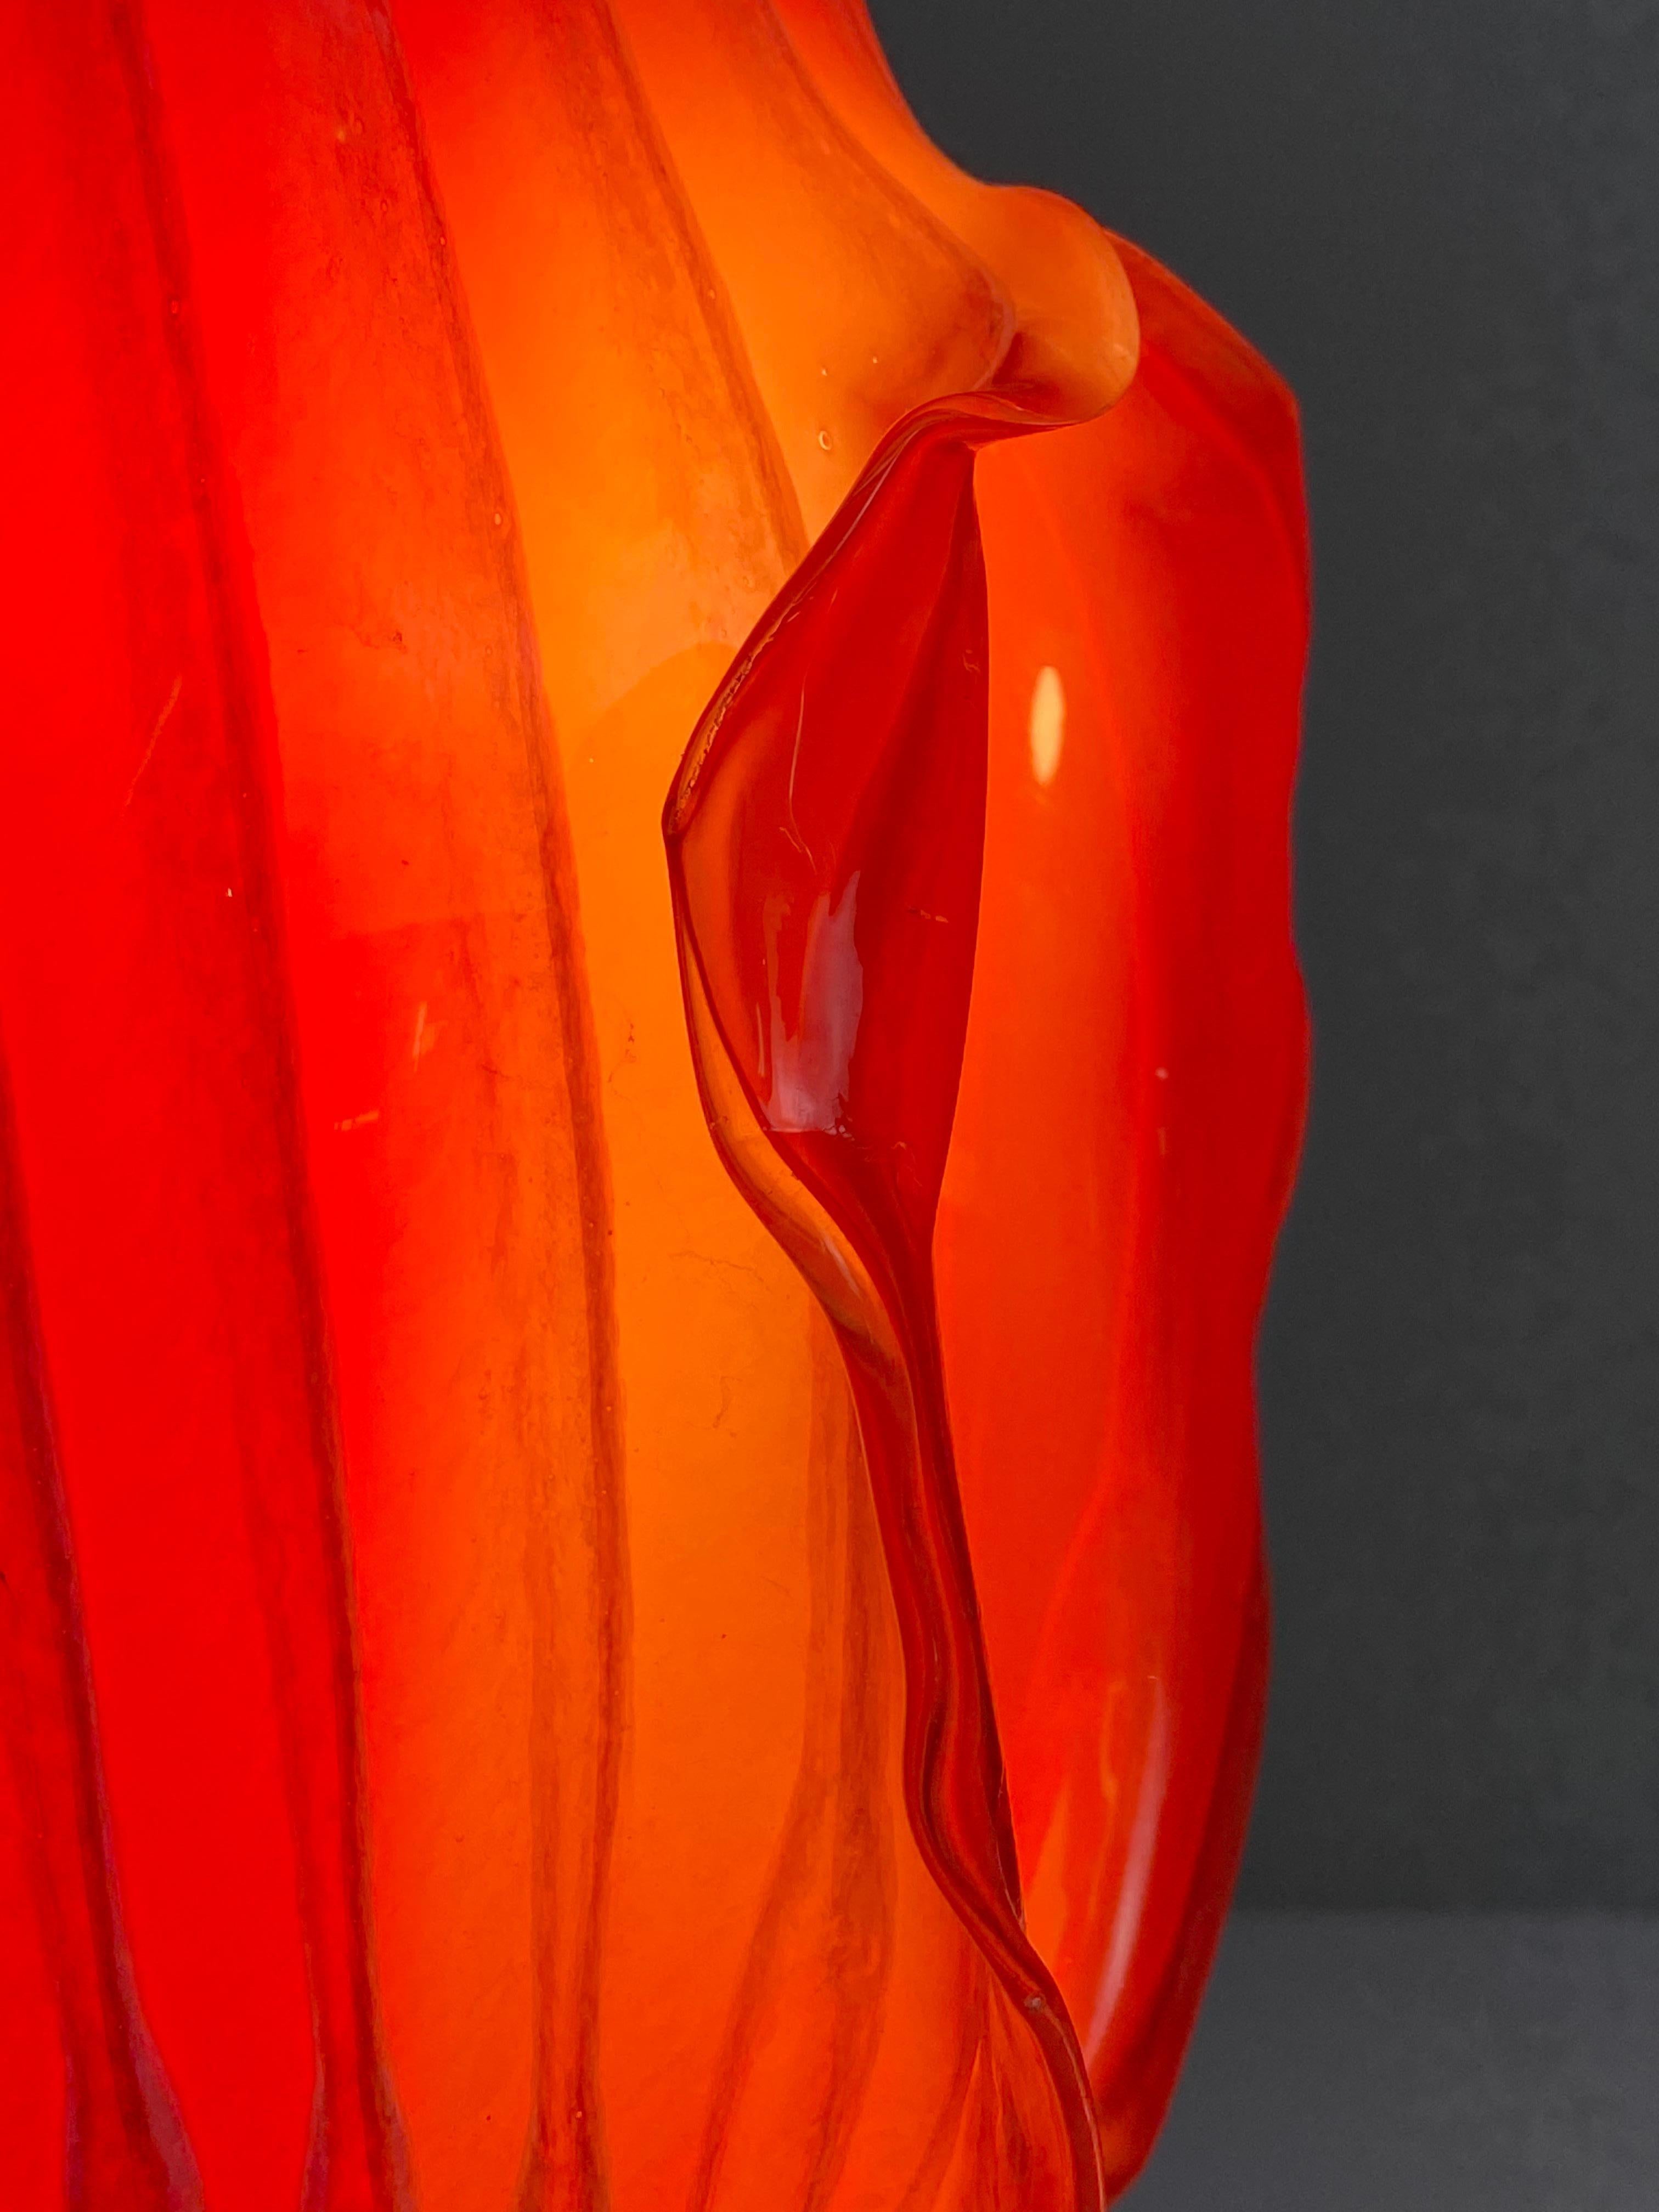 Red Blown Glass Table or Pendent Light, 21st Century by Mattia Biagi In New Condition For Sale In Culver City, CA